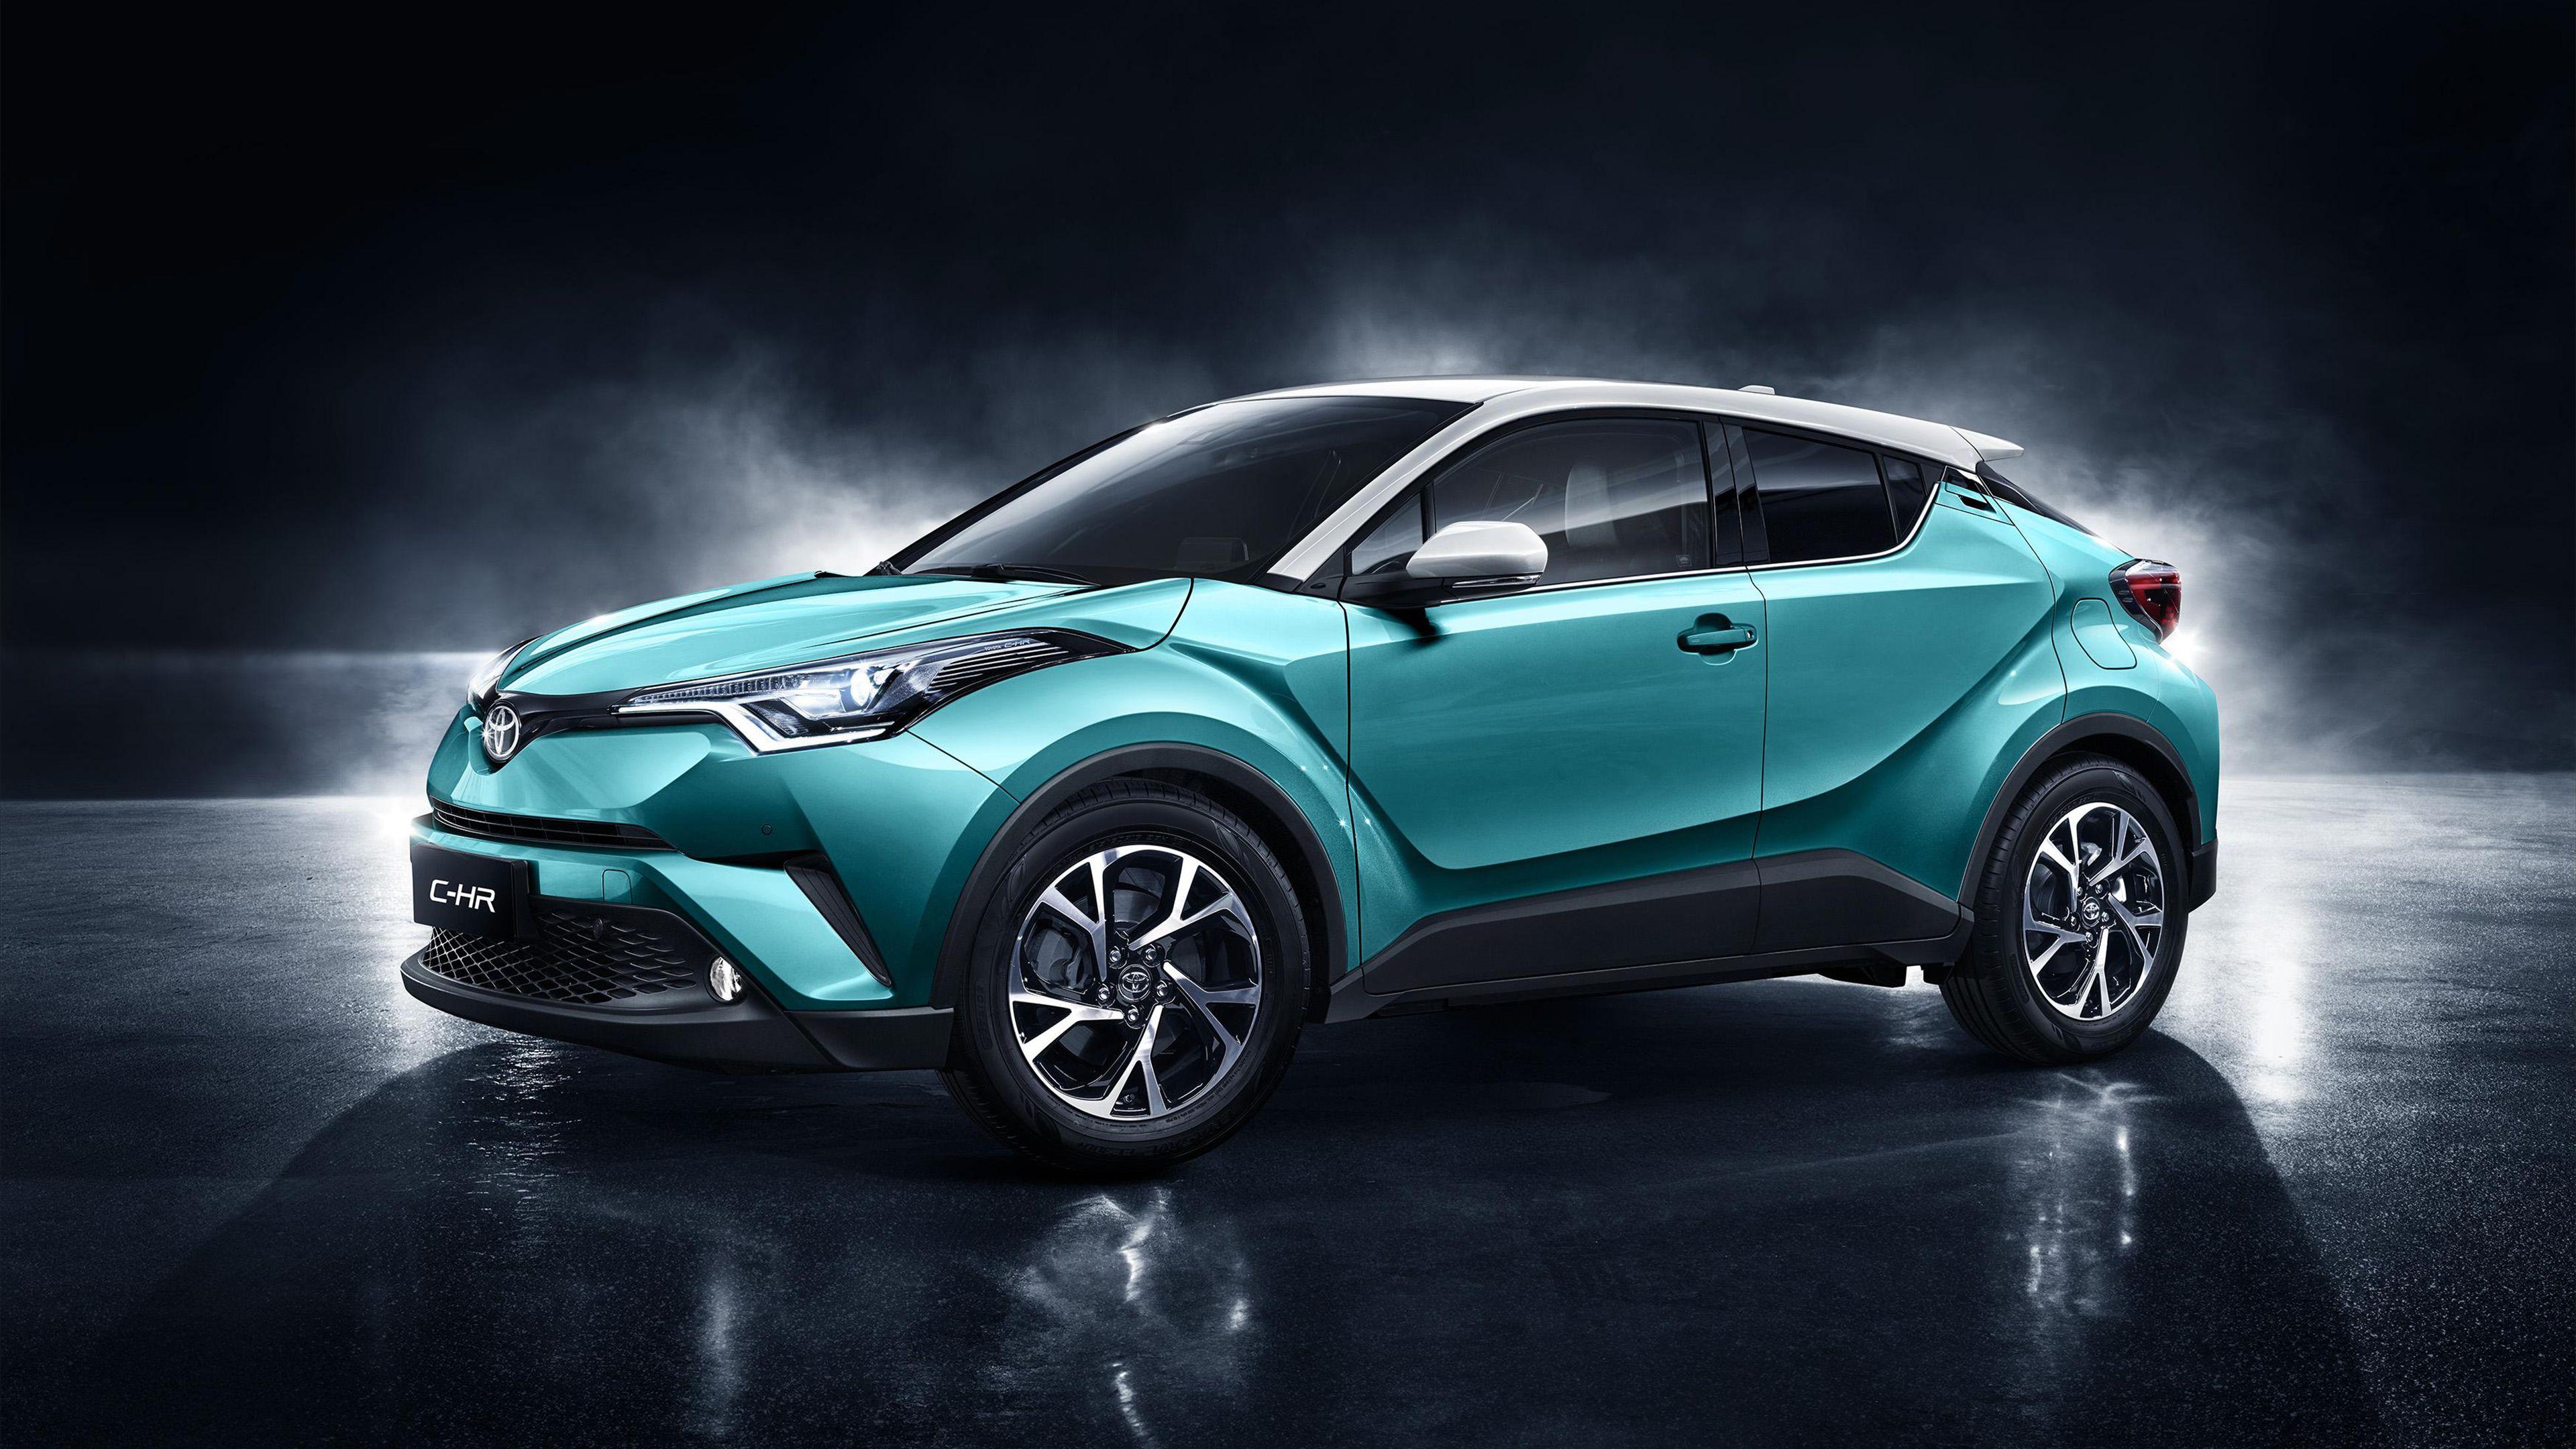 Toyota C-HR compact SUV revealed: new 1.2T, on sale in Australia 2017 – PerformanceDrive